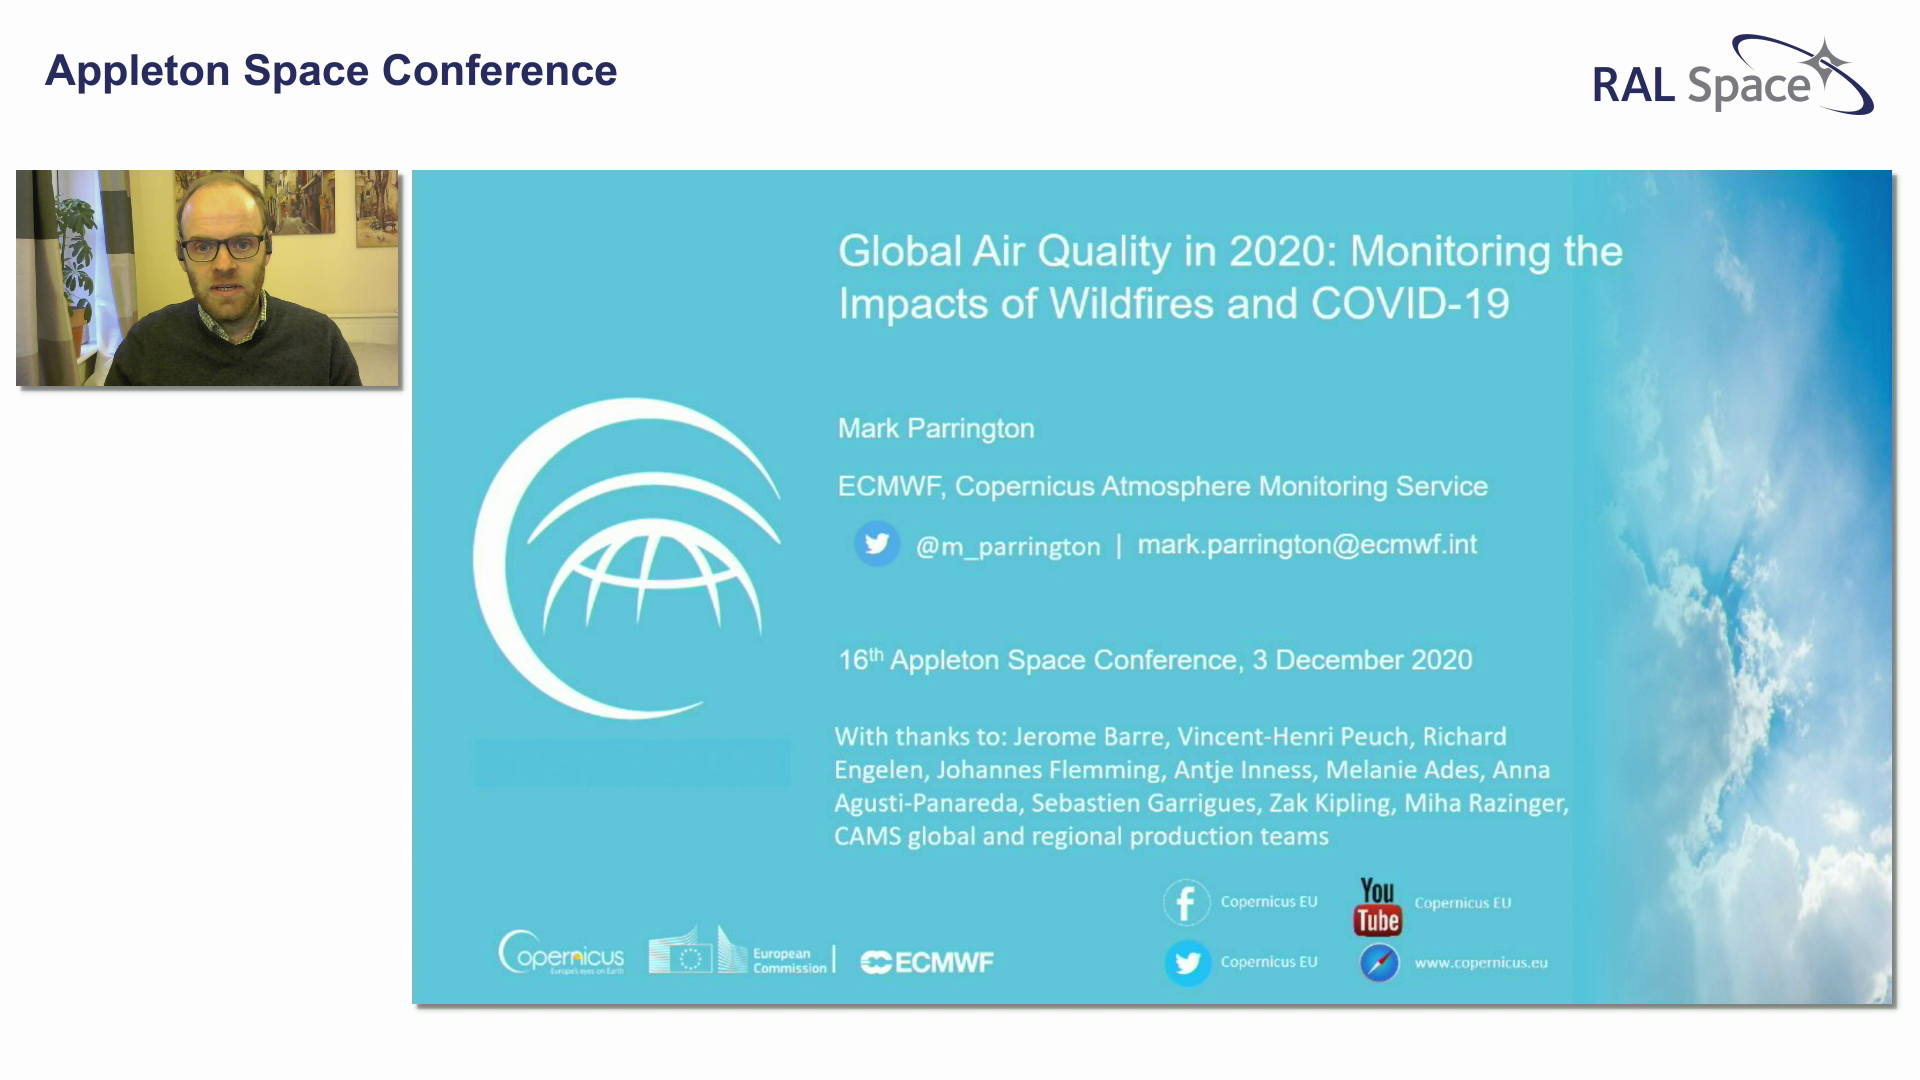 16 Global Air Quality in 2020 Monitoring the Impacts of Wildfires and COVID-19 v2 HQ.png